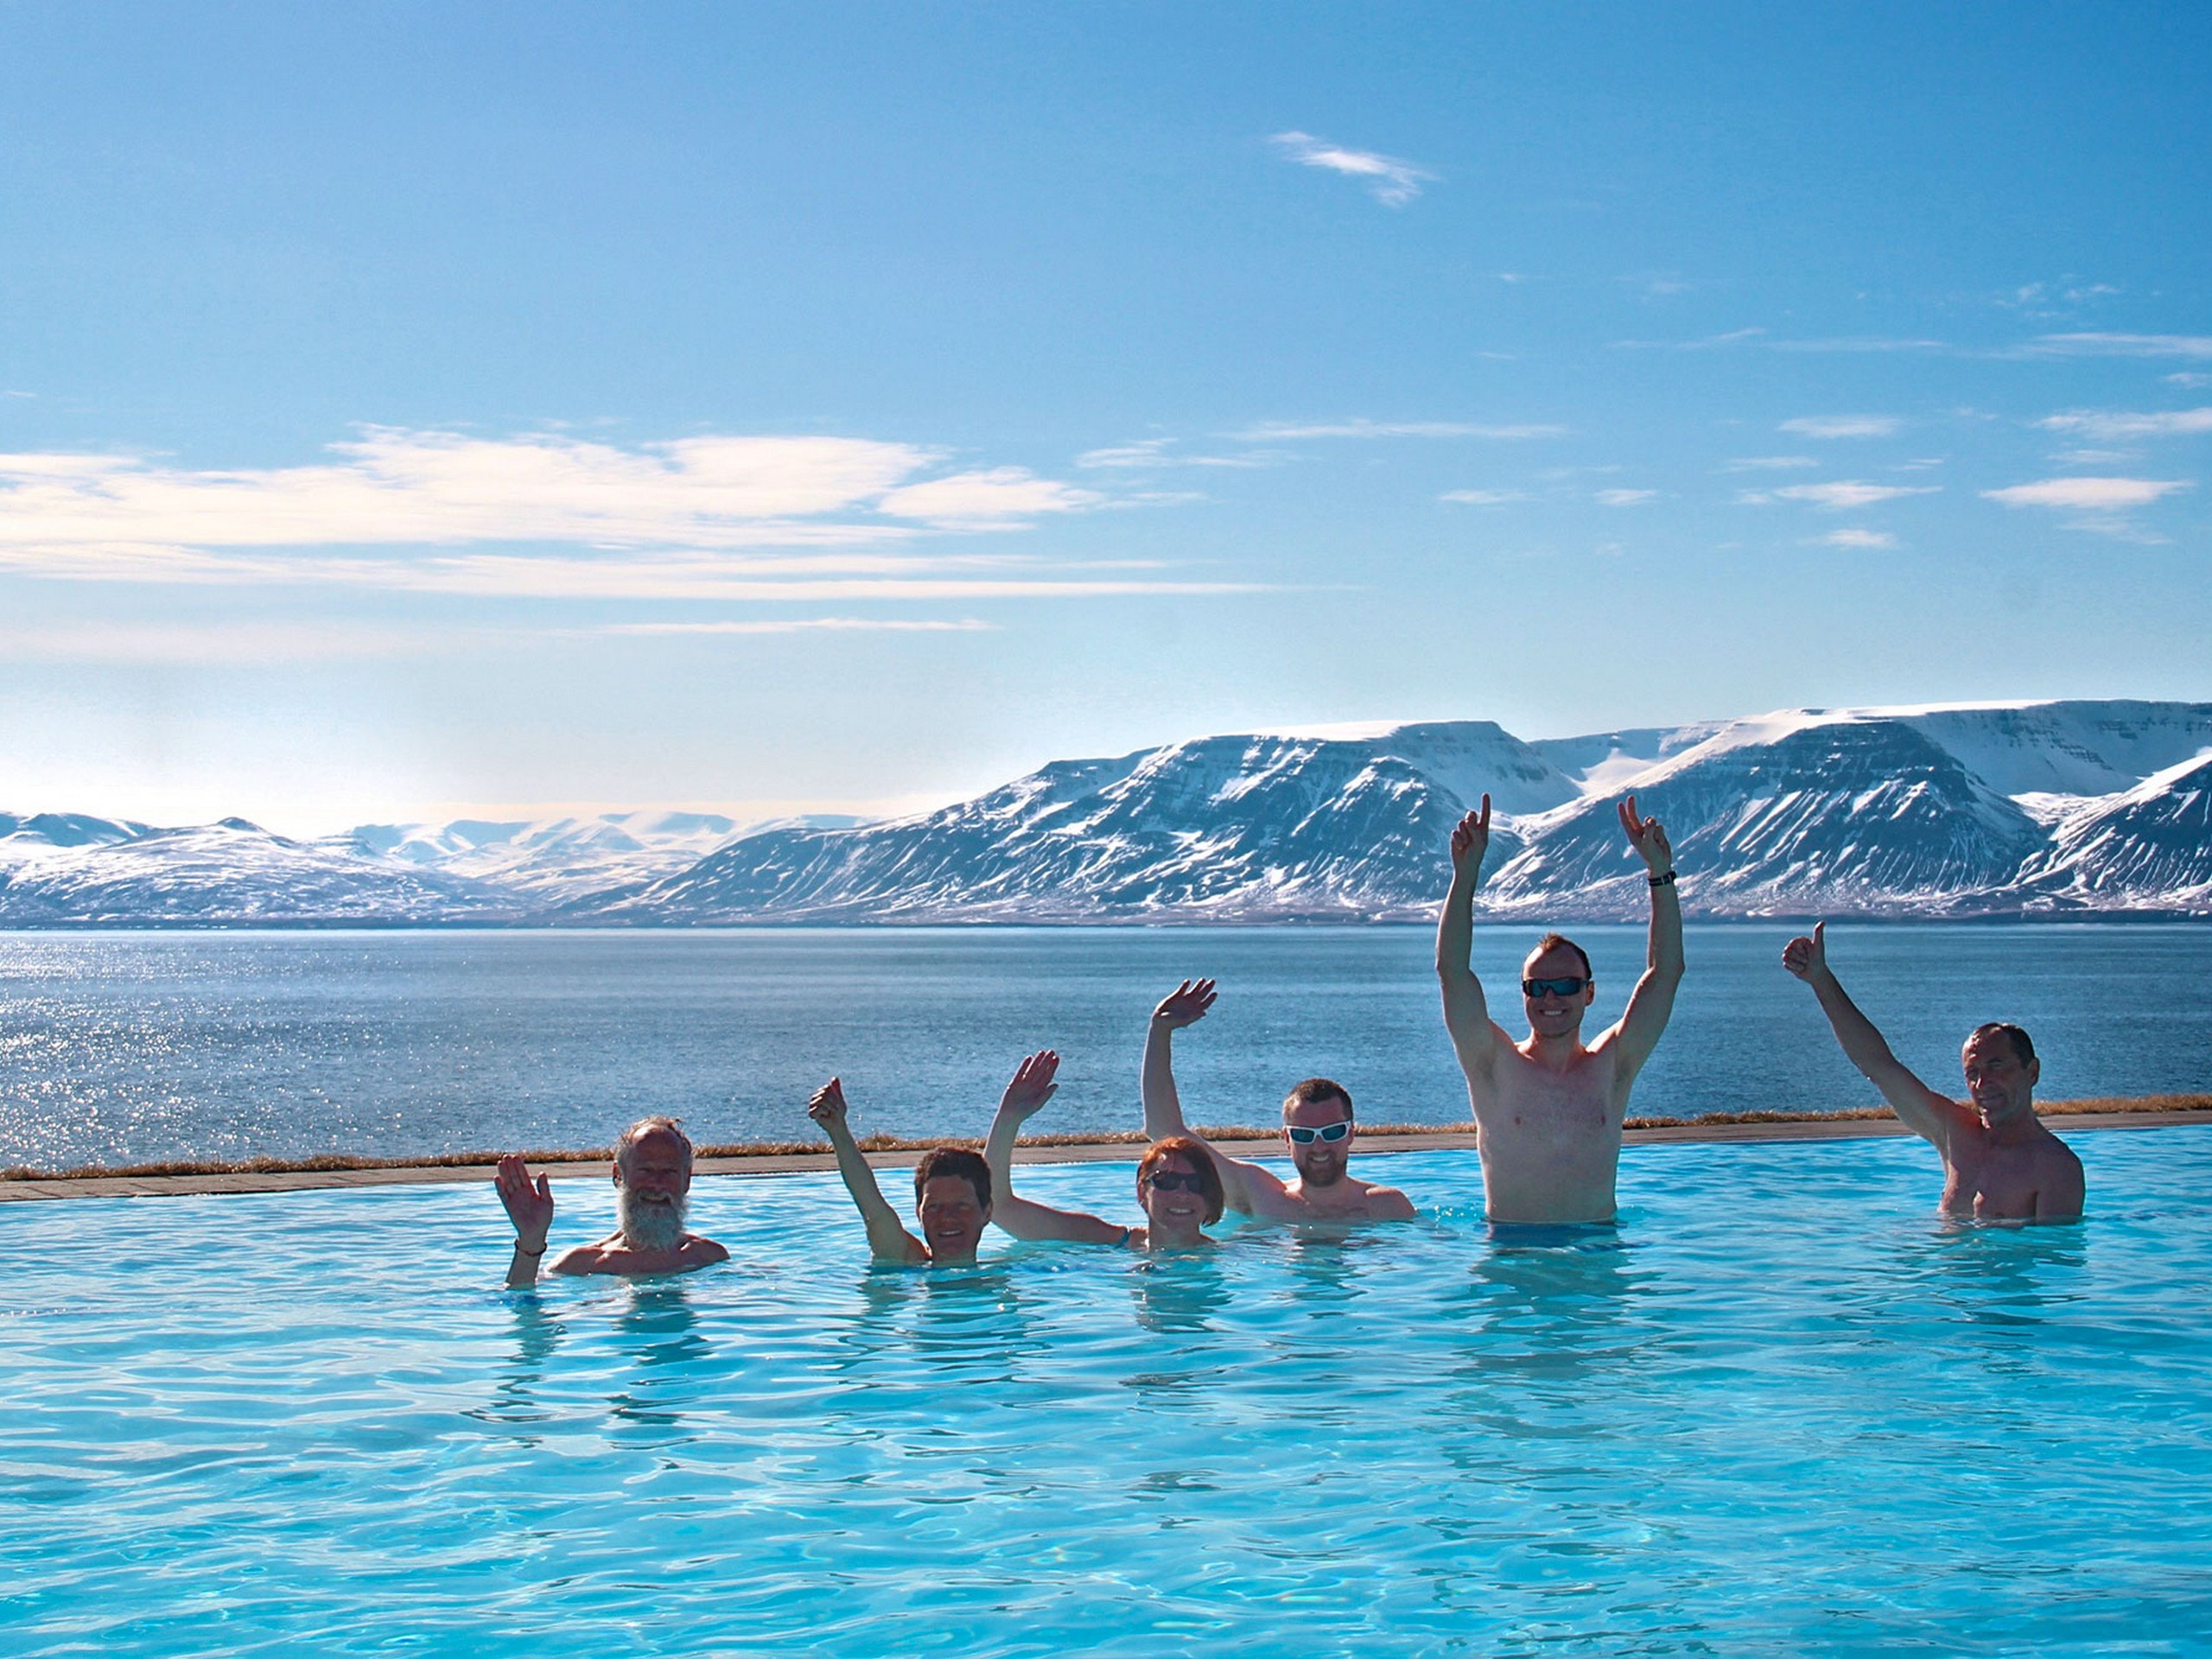 Enjoying the pool time in South Iceland during the winter - Photo by Jan Zelina